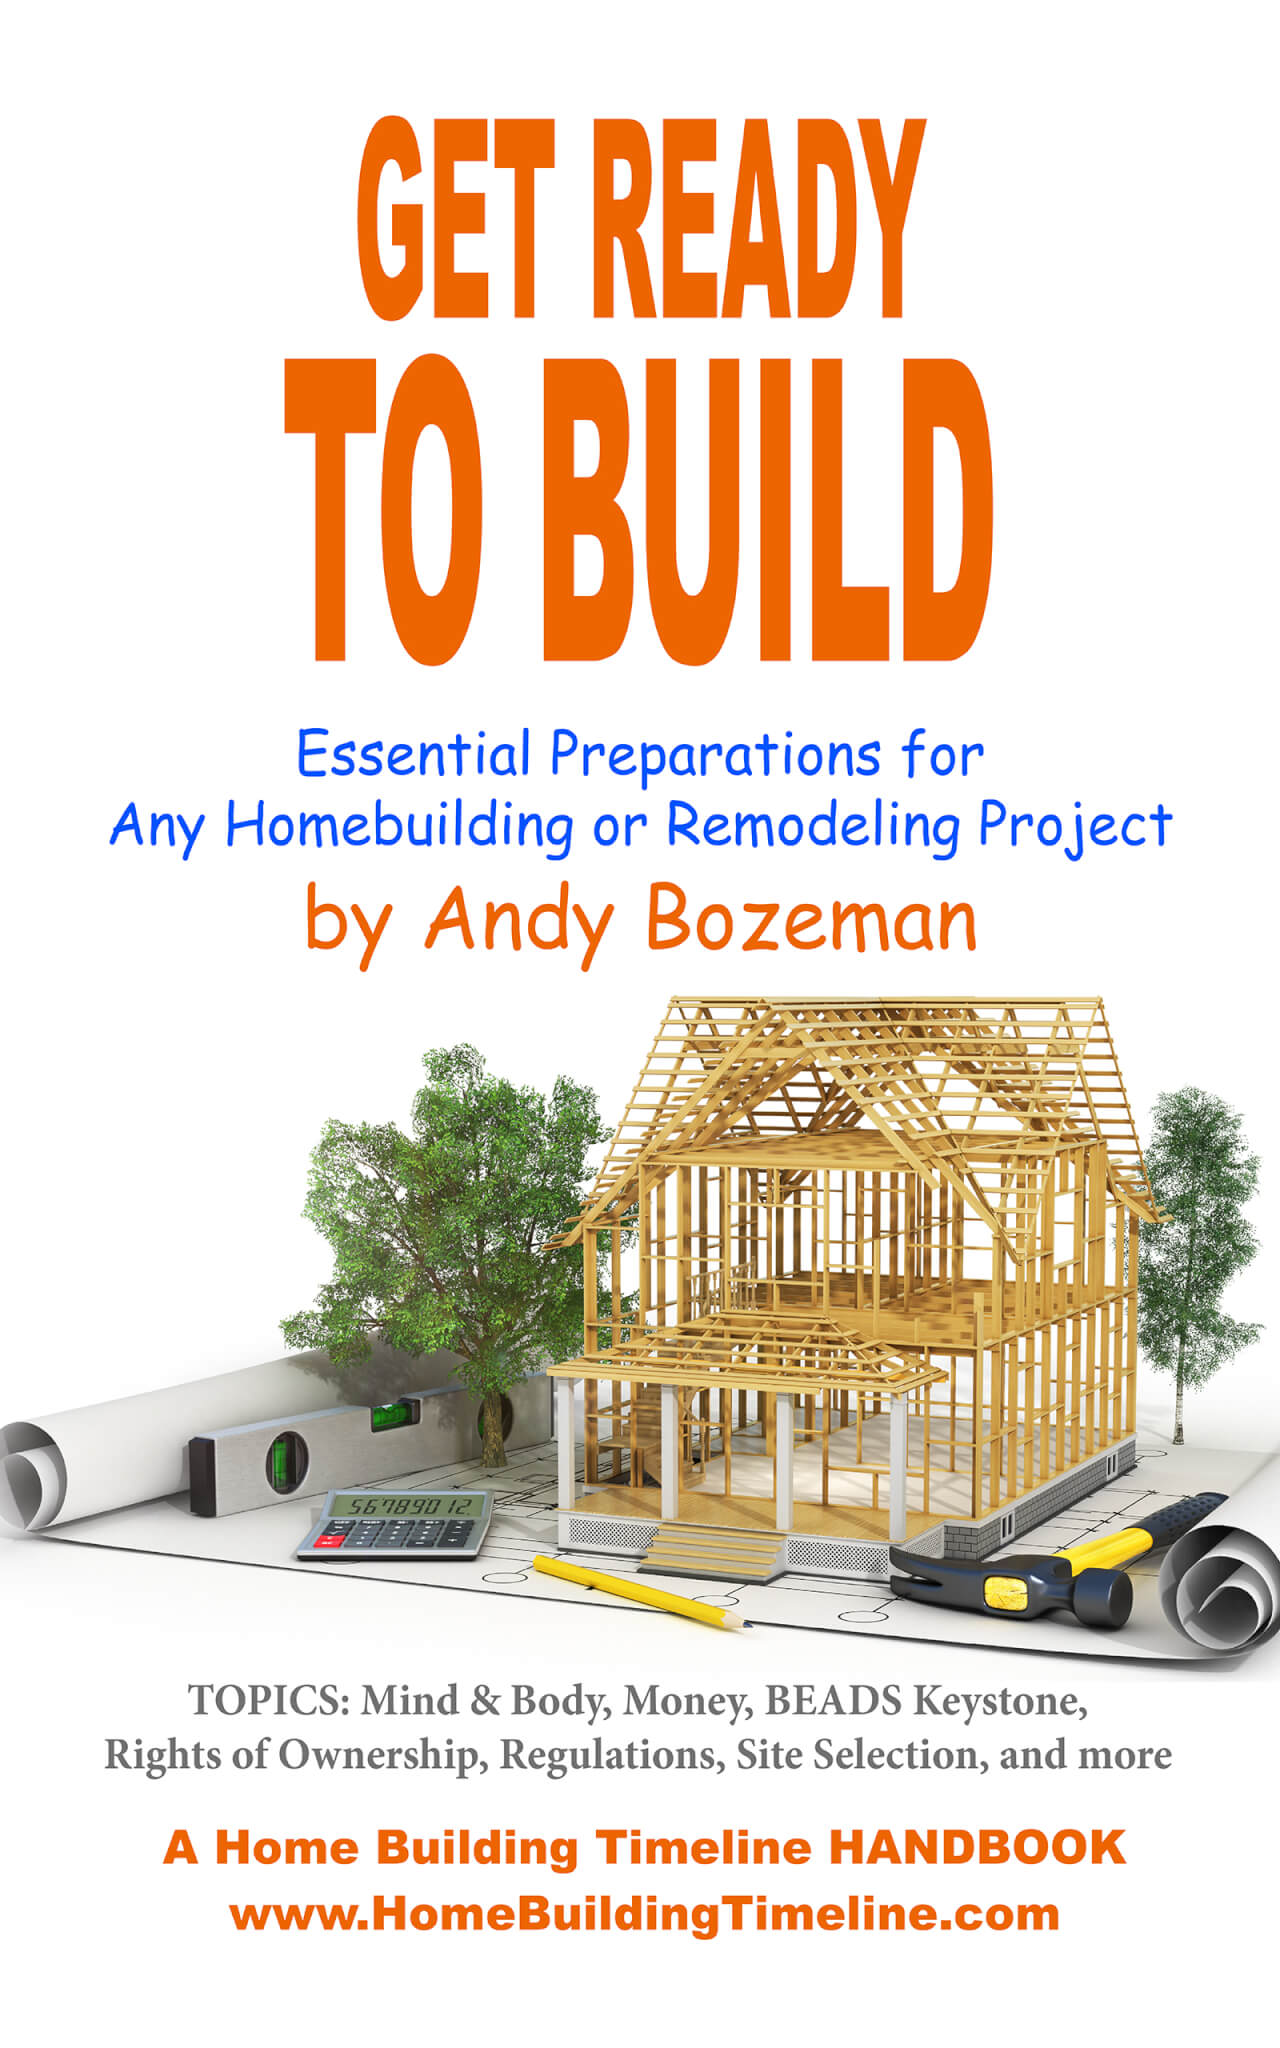 GET READY TO BUILD : Essential Preparations for Any Homebuilding or Remodeling Project